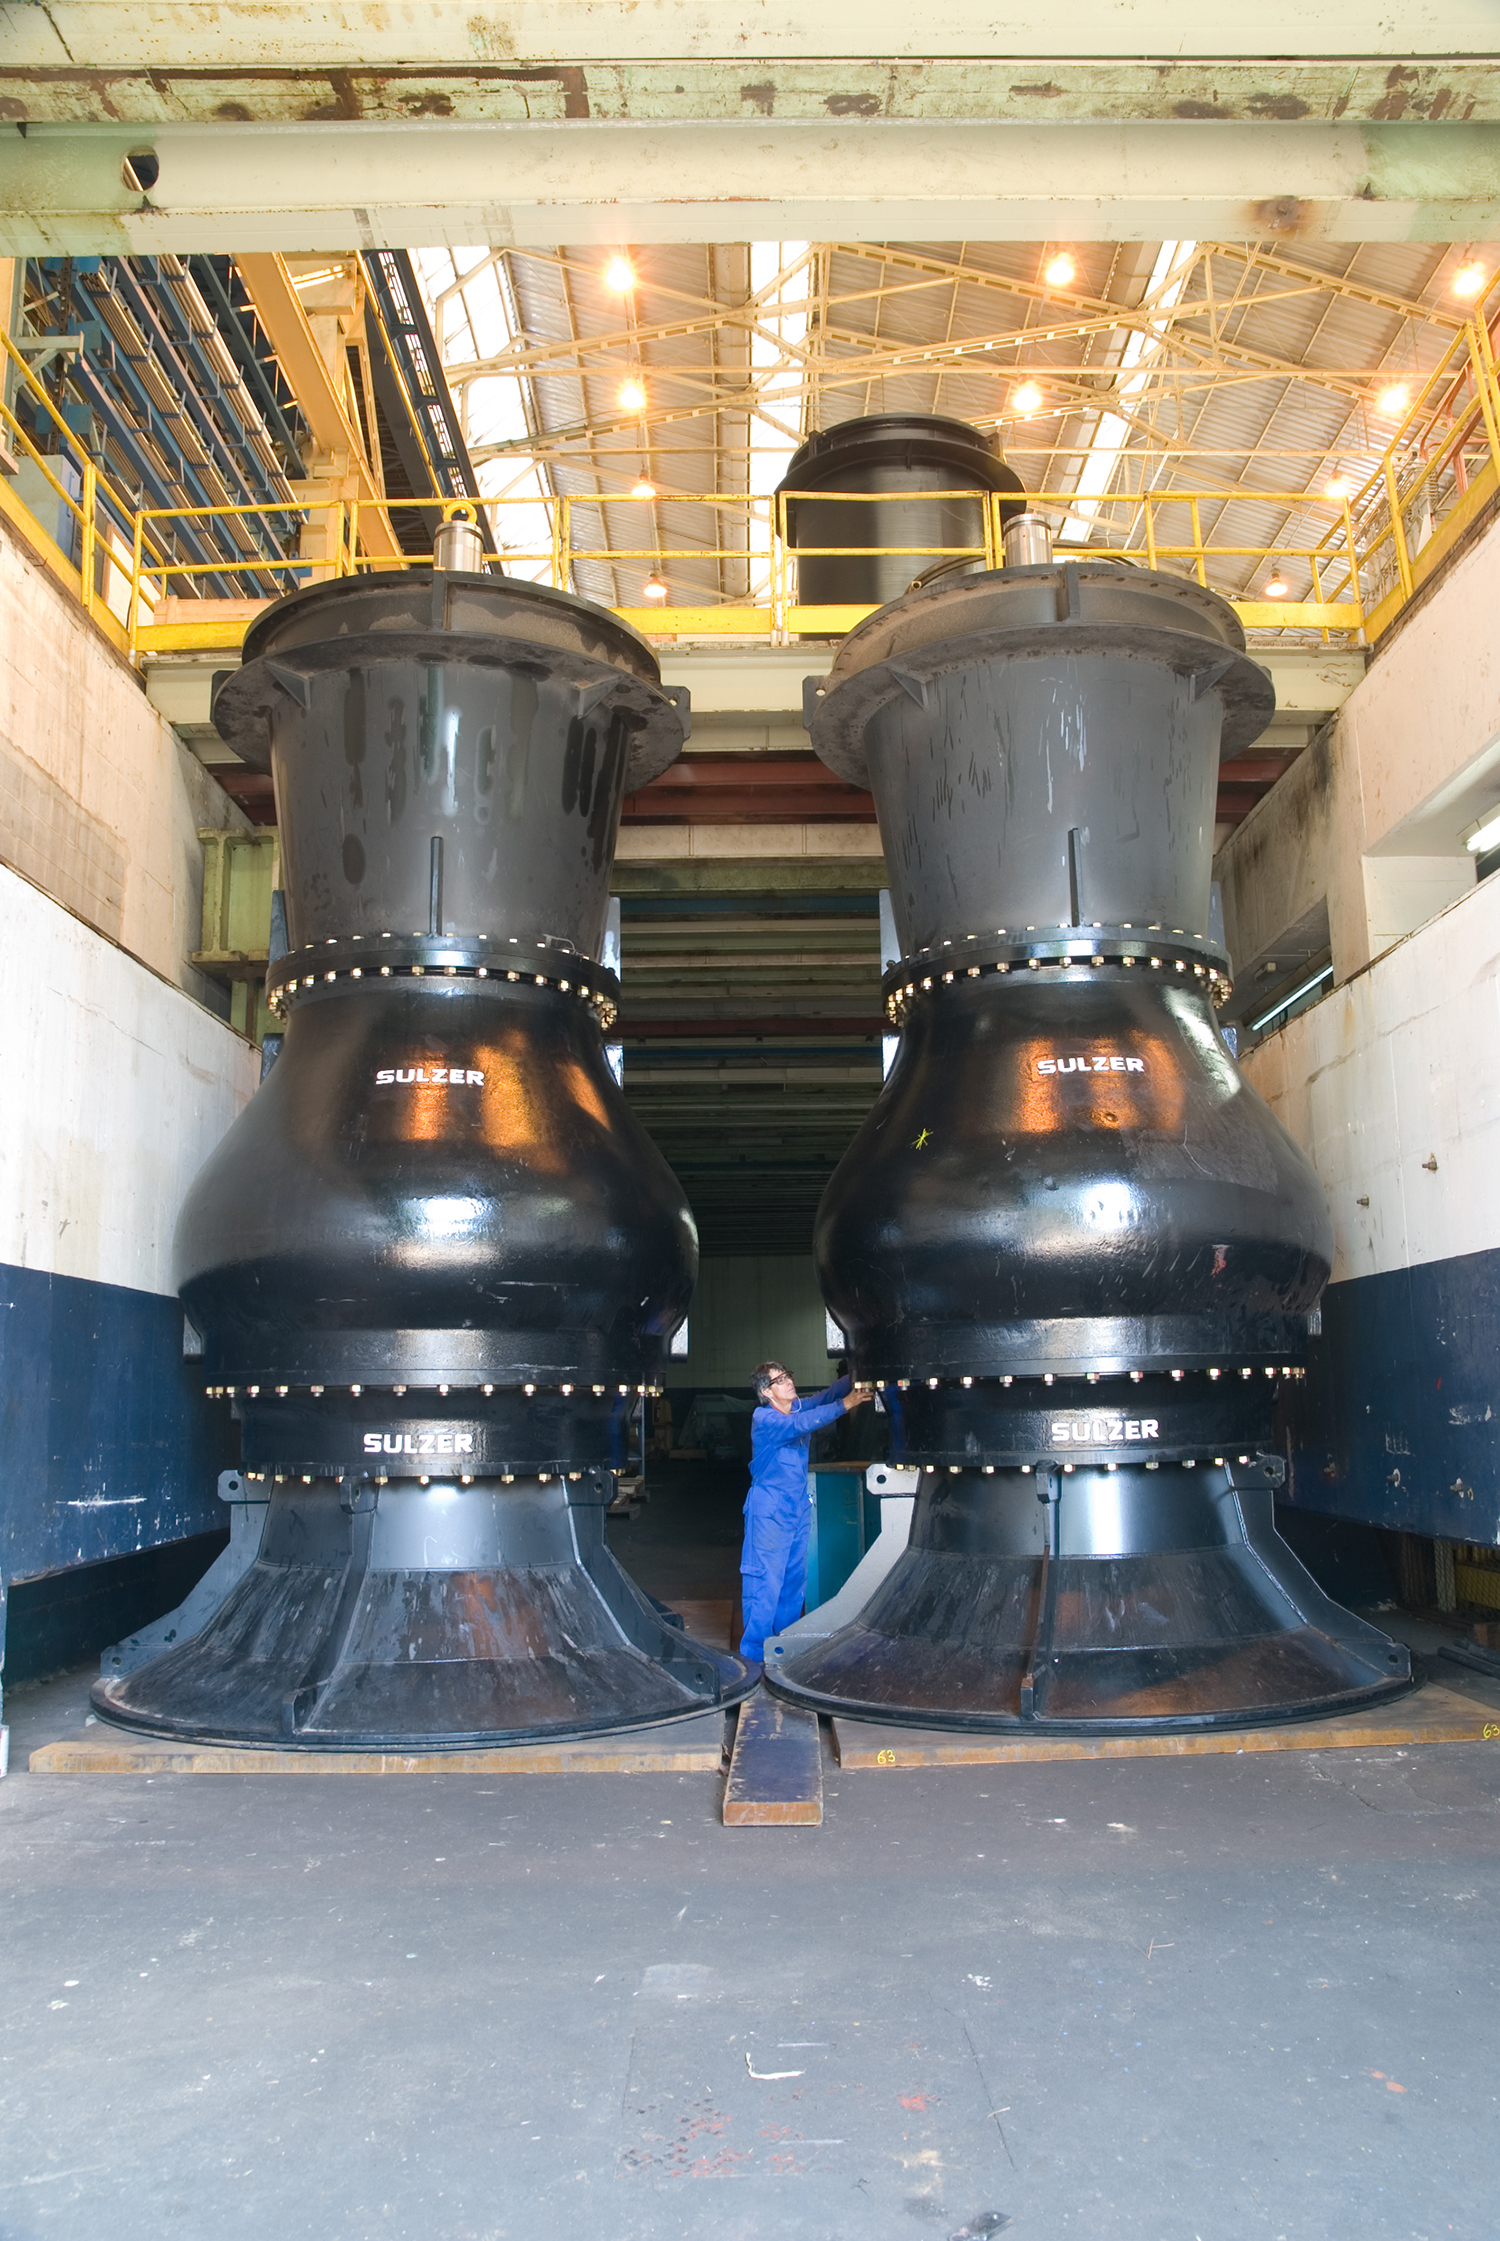 The project involved some of the largest pumps ever built by Sulzer.